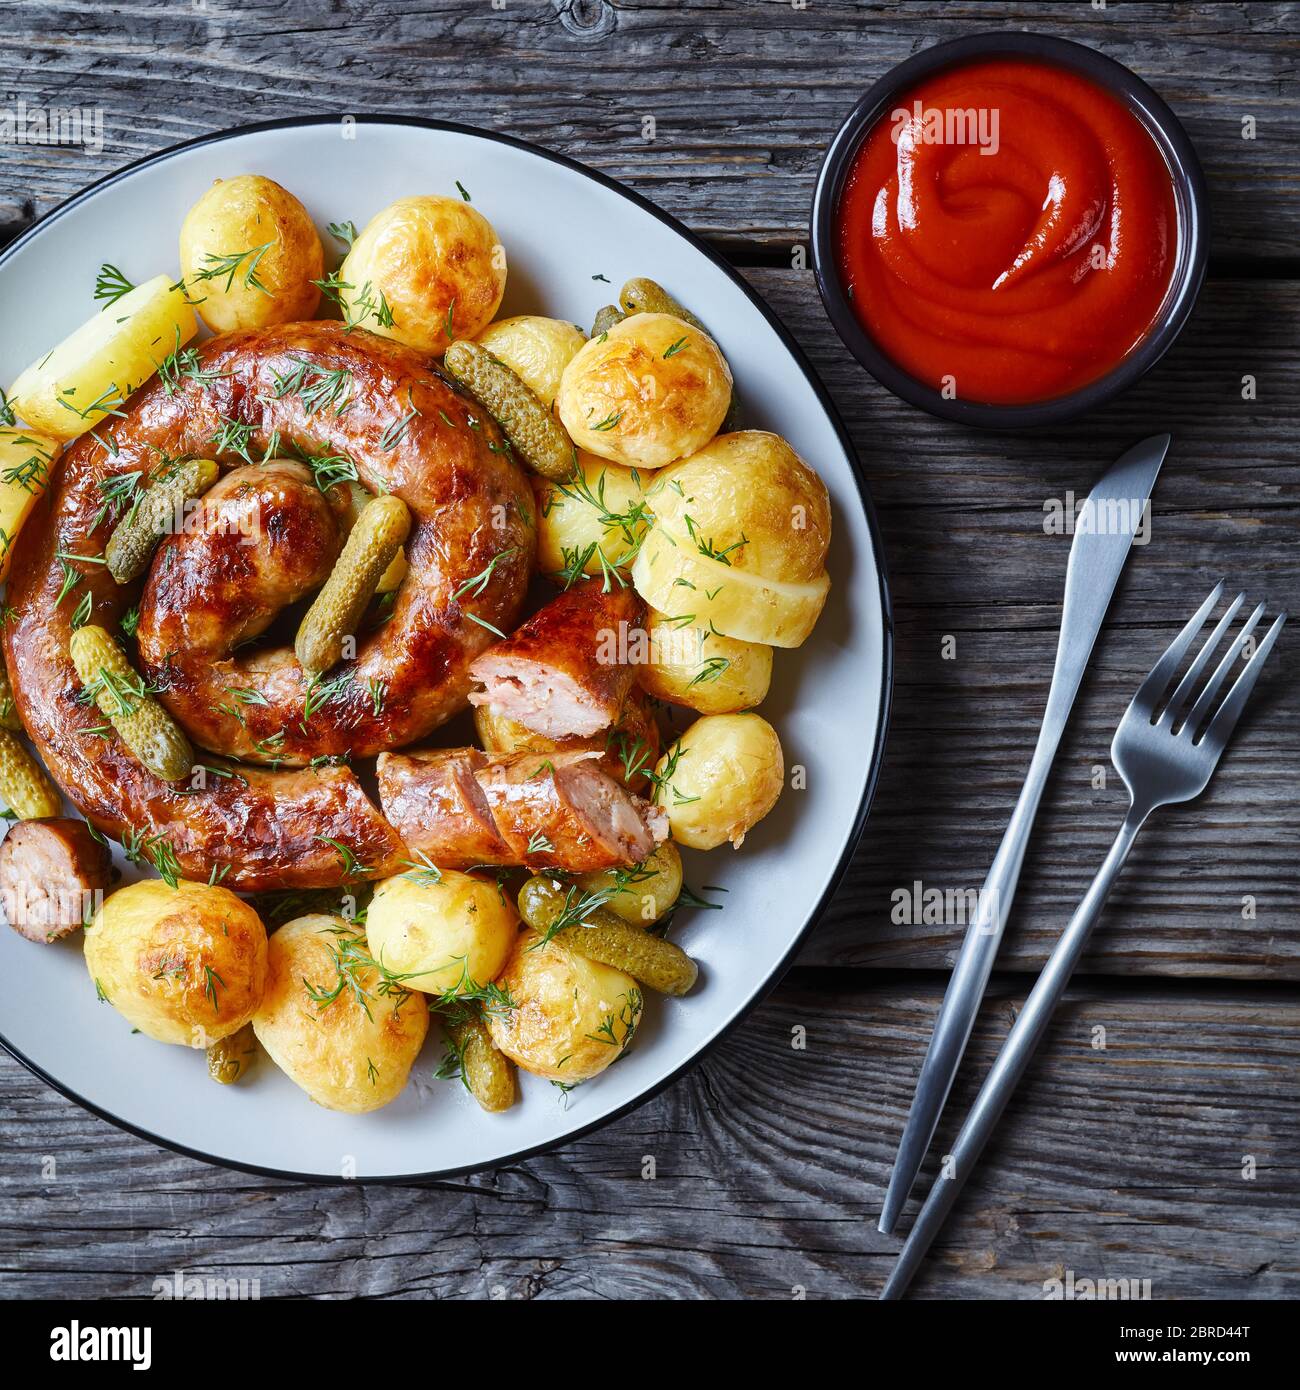 German lunch: new potato, sausage and gherkins, sprinkled with fresh dill on a plate with cutlery and ketchup on a wooden table, flat lay, close-up Stock Photo